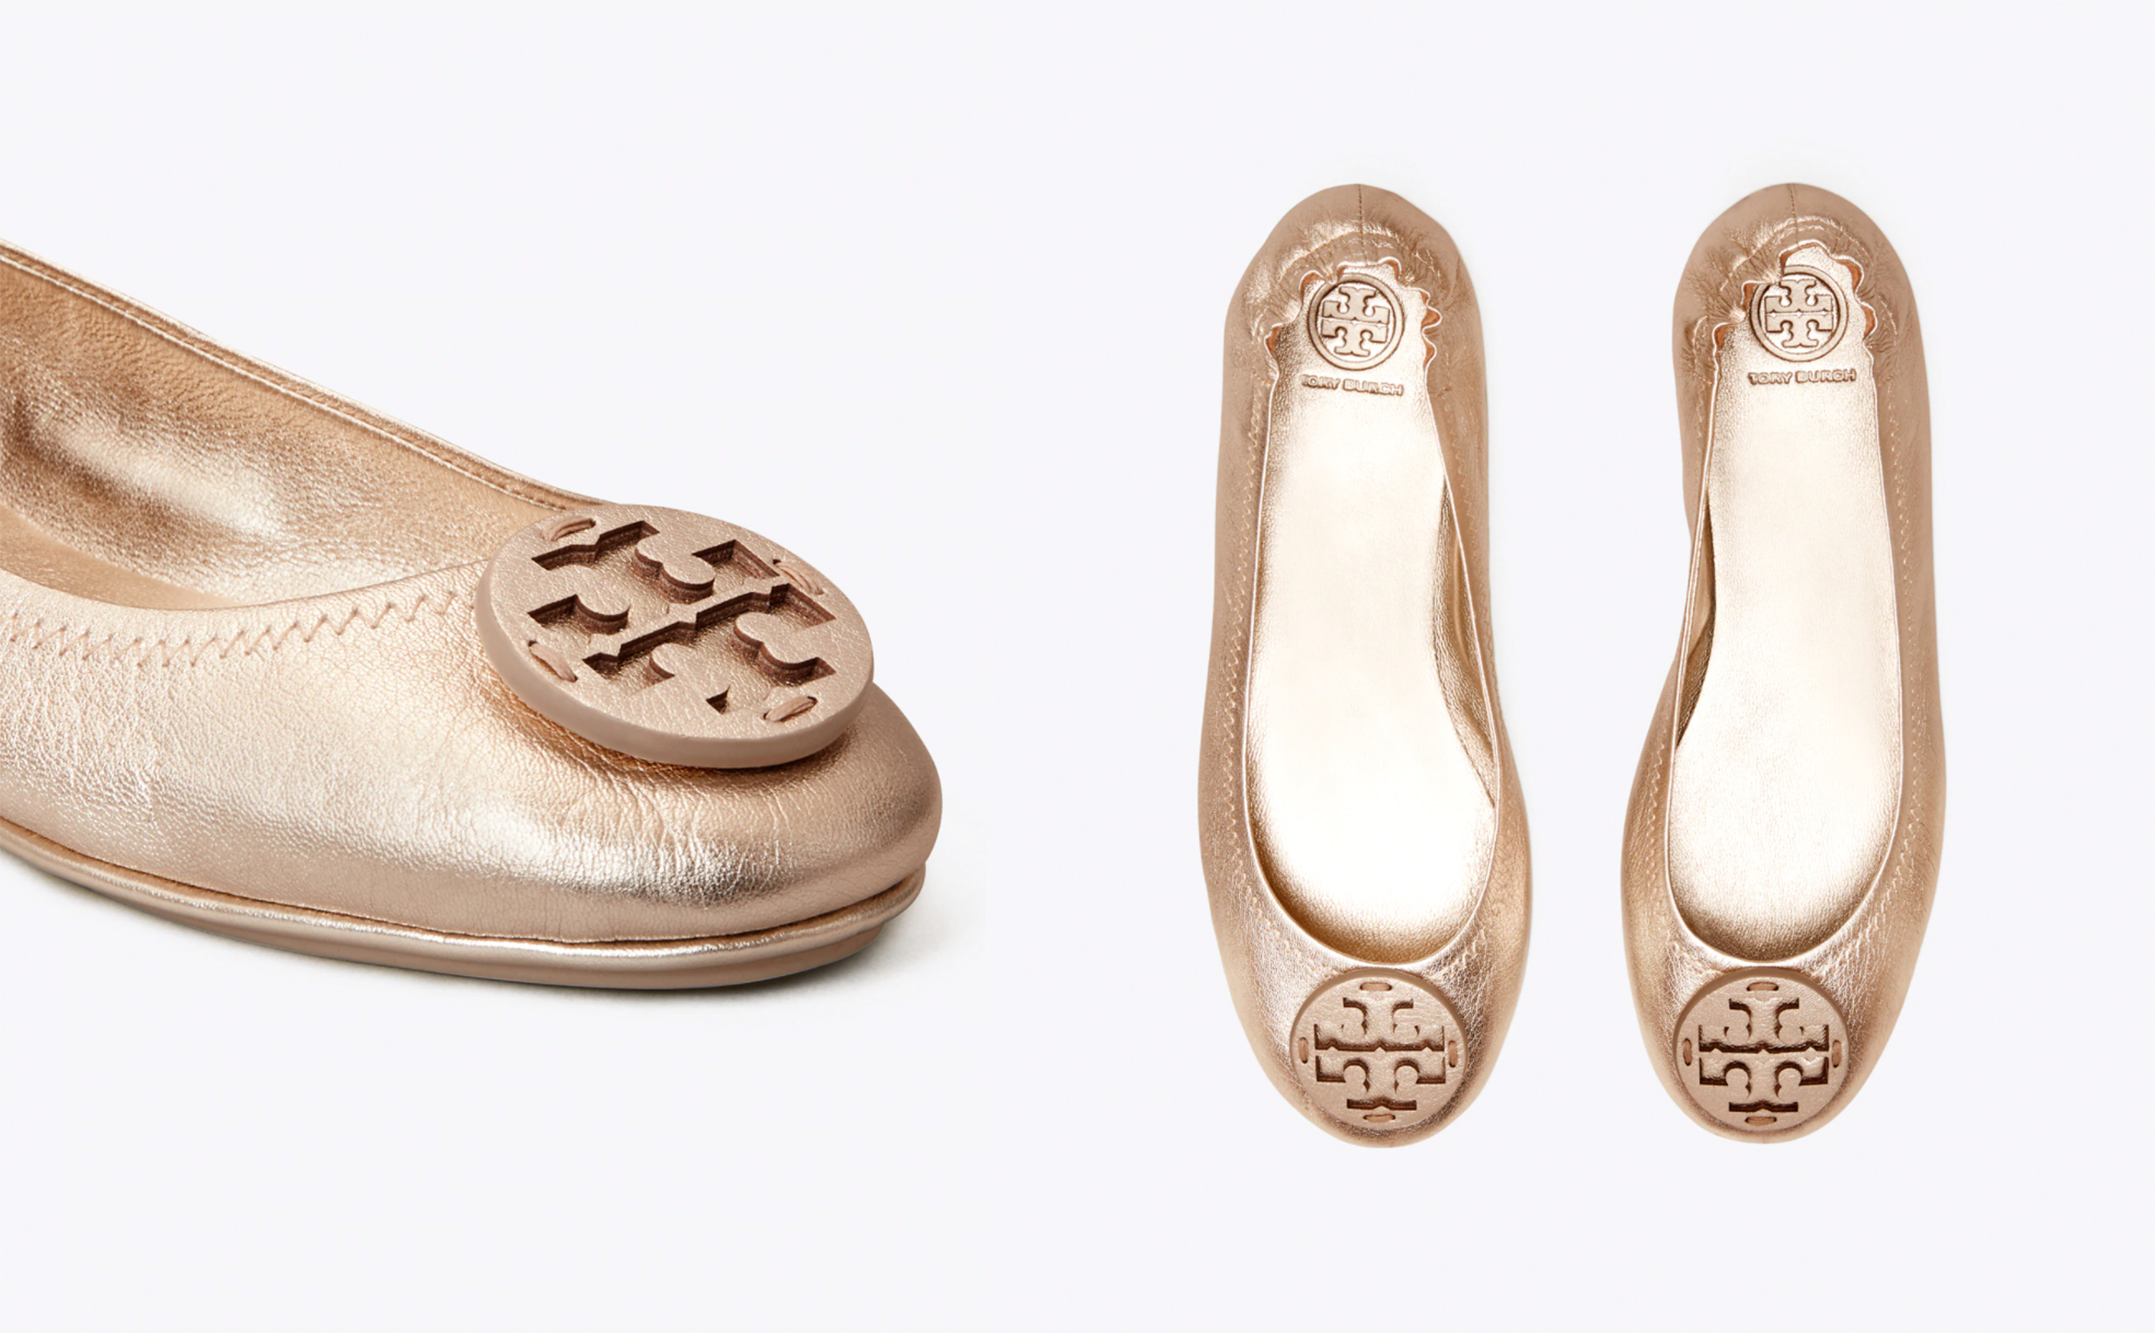 Tory Burch Famous Ballet Flats Are on 